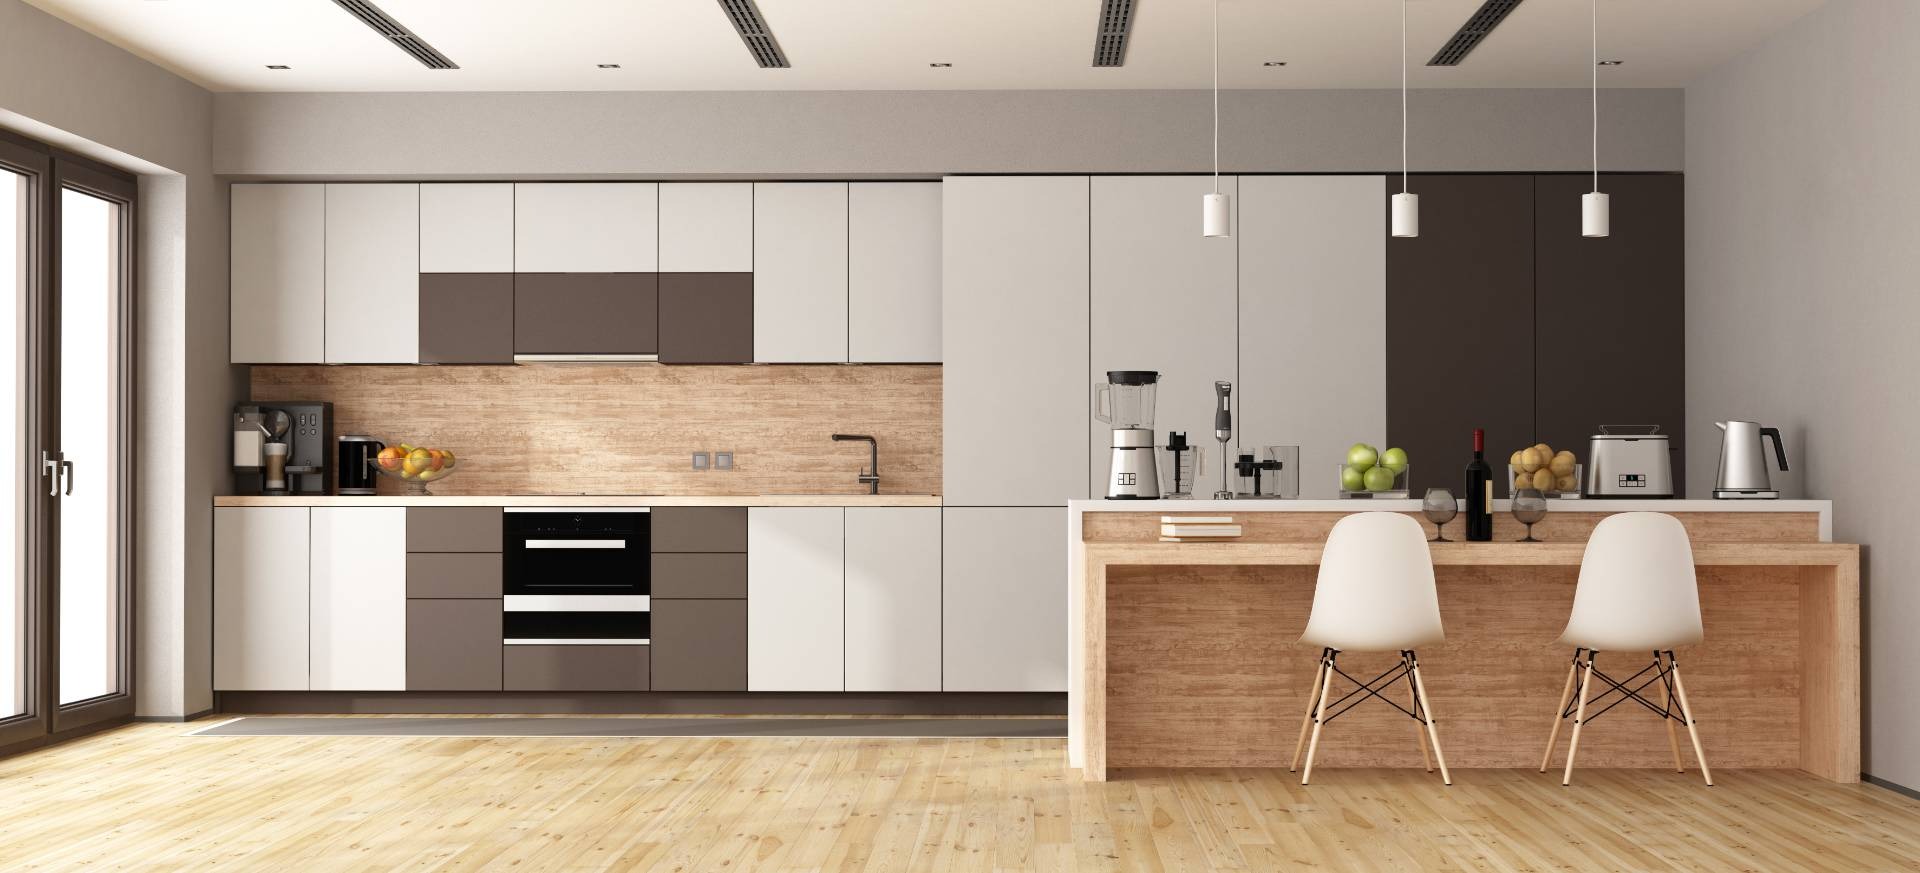 4 Tips on How to Apply Kitchen Design Ideas in Your Home